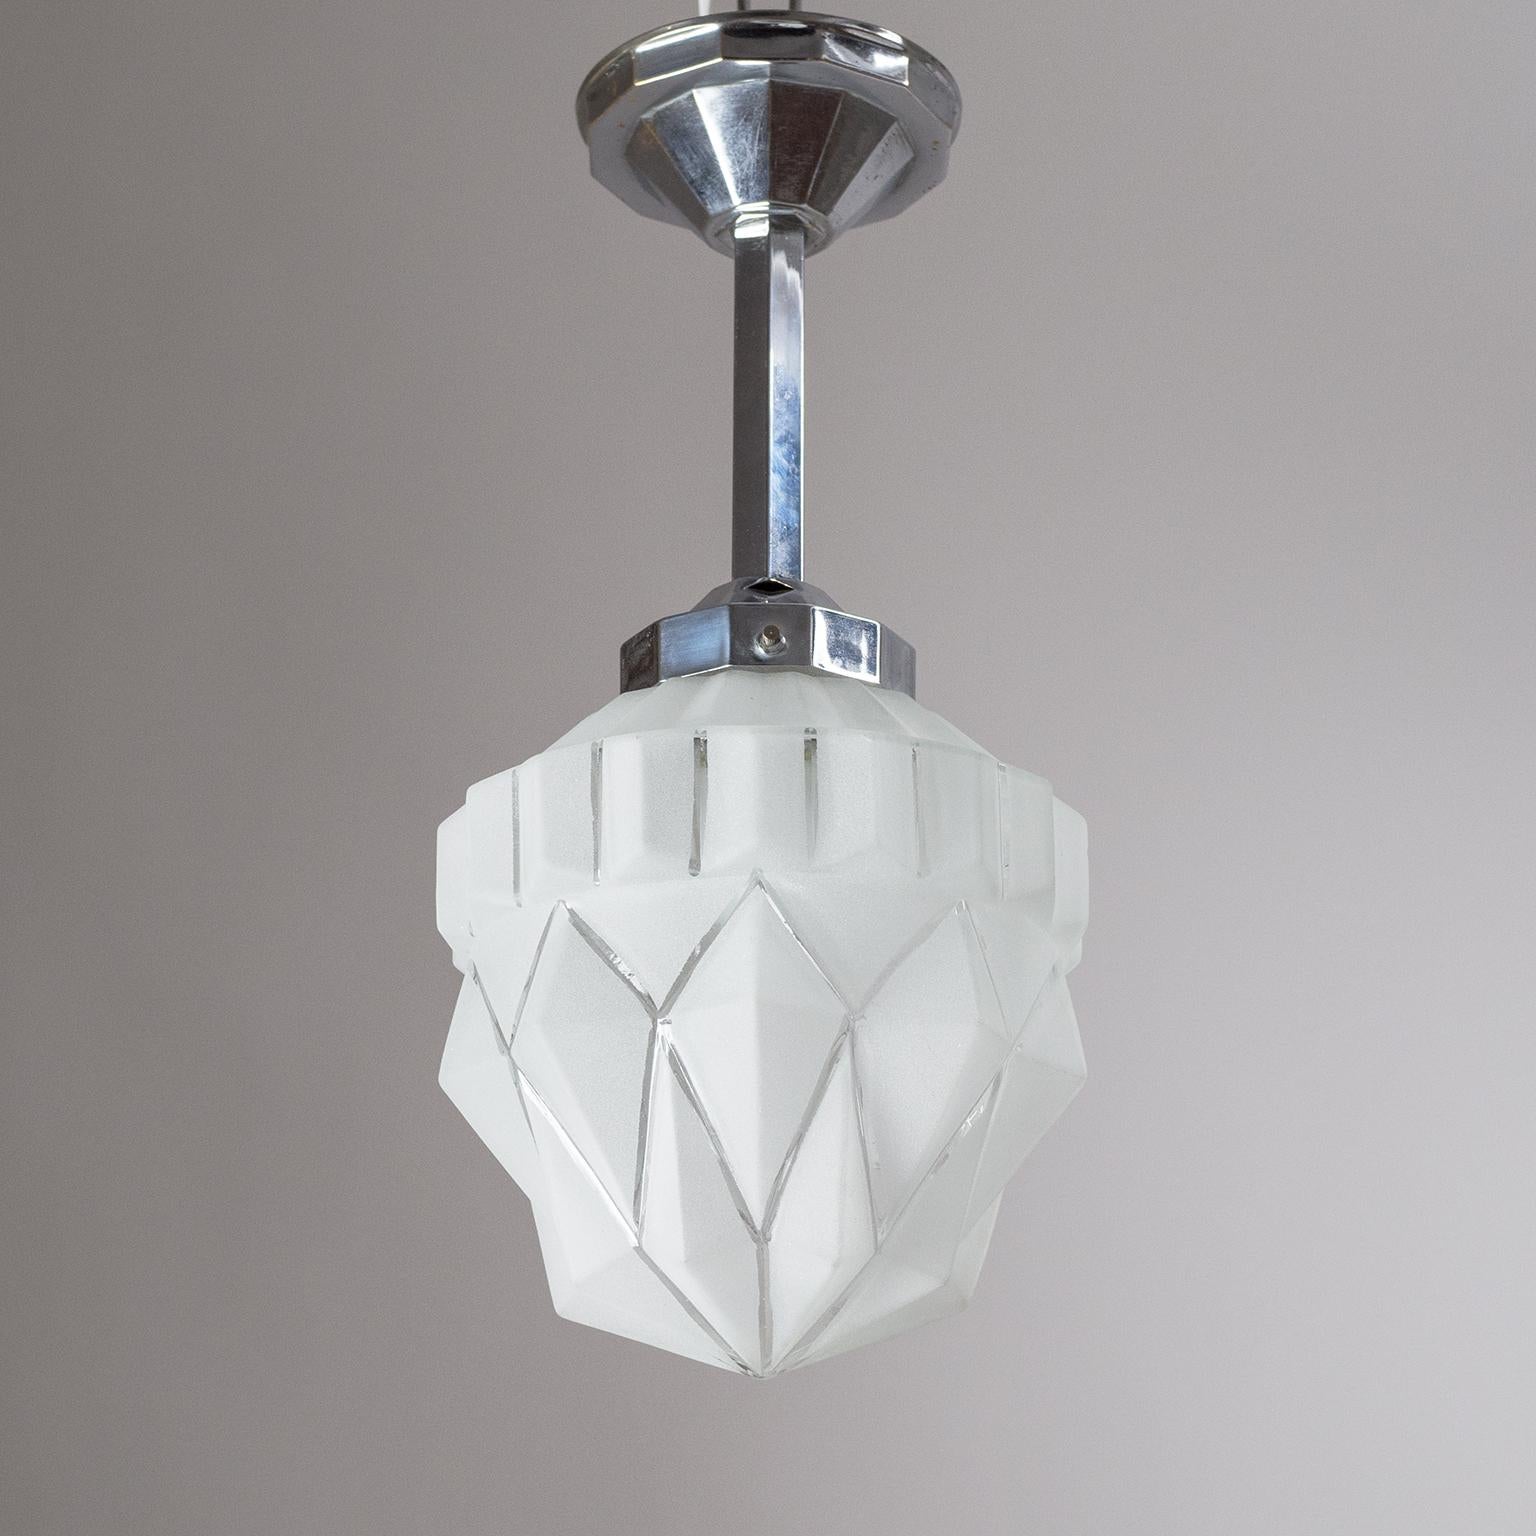 Classic geometric French Art Deco pendant from the 1920s. The hardware is chromed brass with a hexagonal stem and 12-sided canopy and socket cover. Suspended from this is a multi-facetted and tiered frosted glass diffuser. Very nice original